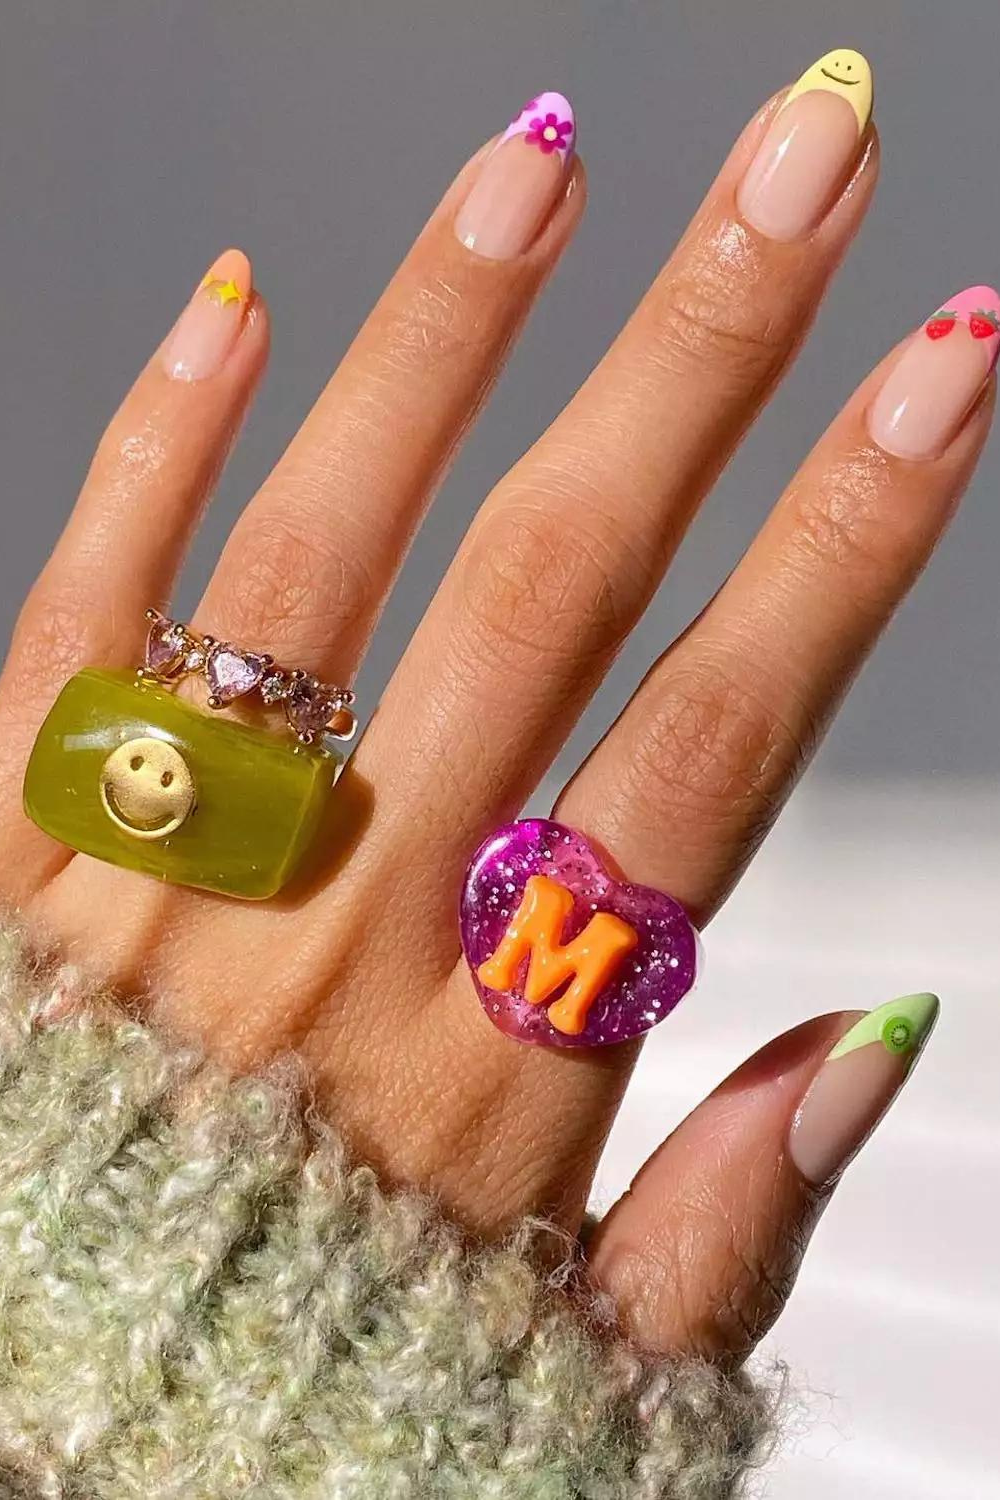 43 Drop Dead Gorgeous March Nails To Get Flooded With Compliments!